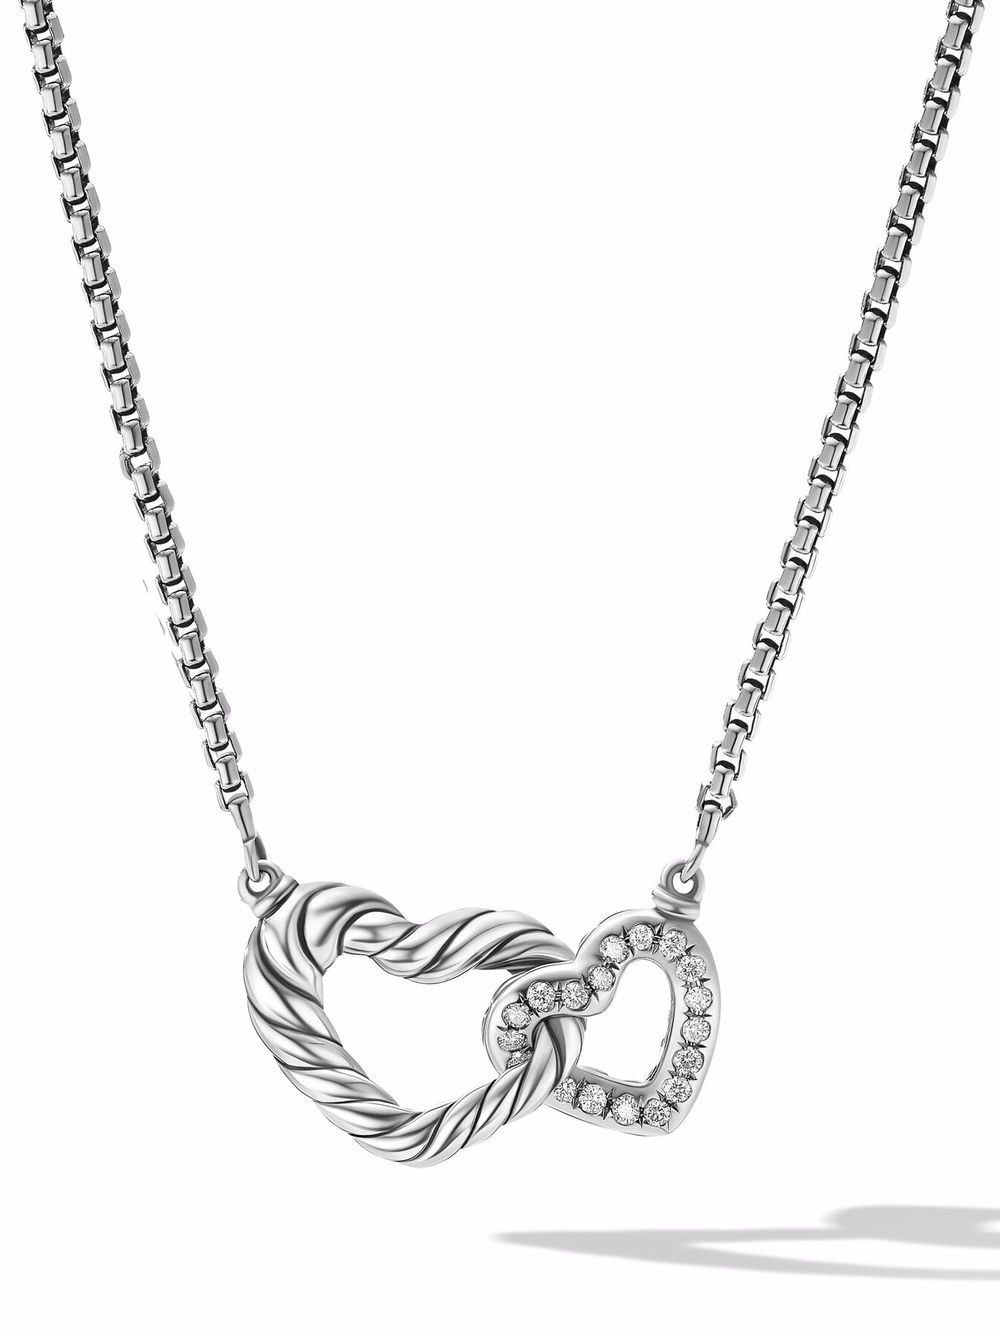 sterling silver Cable Collectibles Double Heart diamond necklace